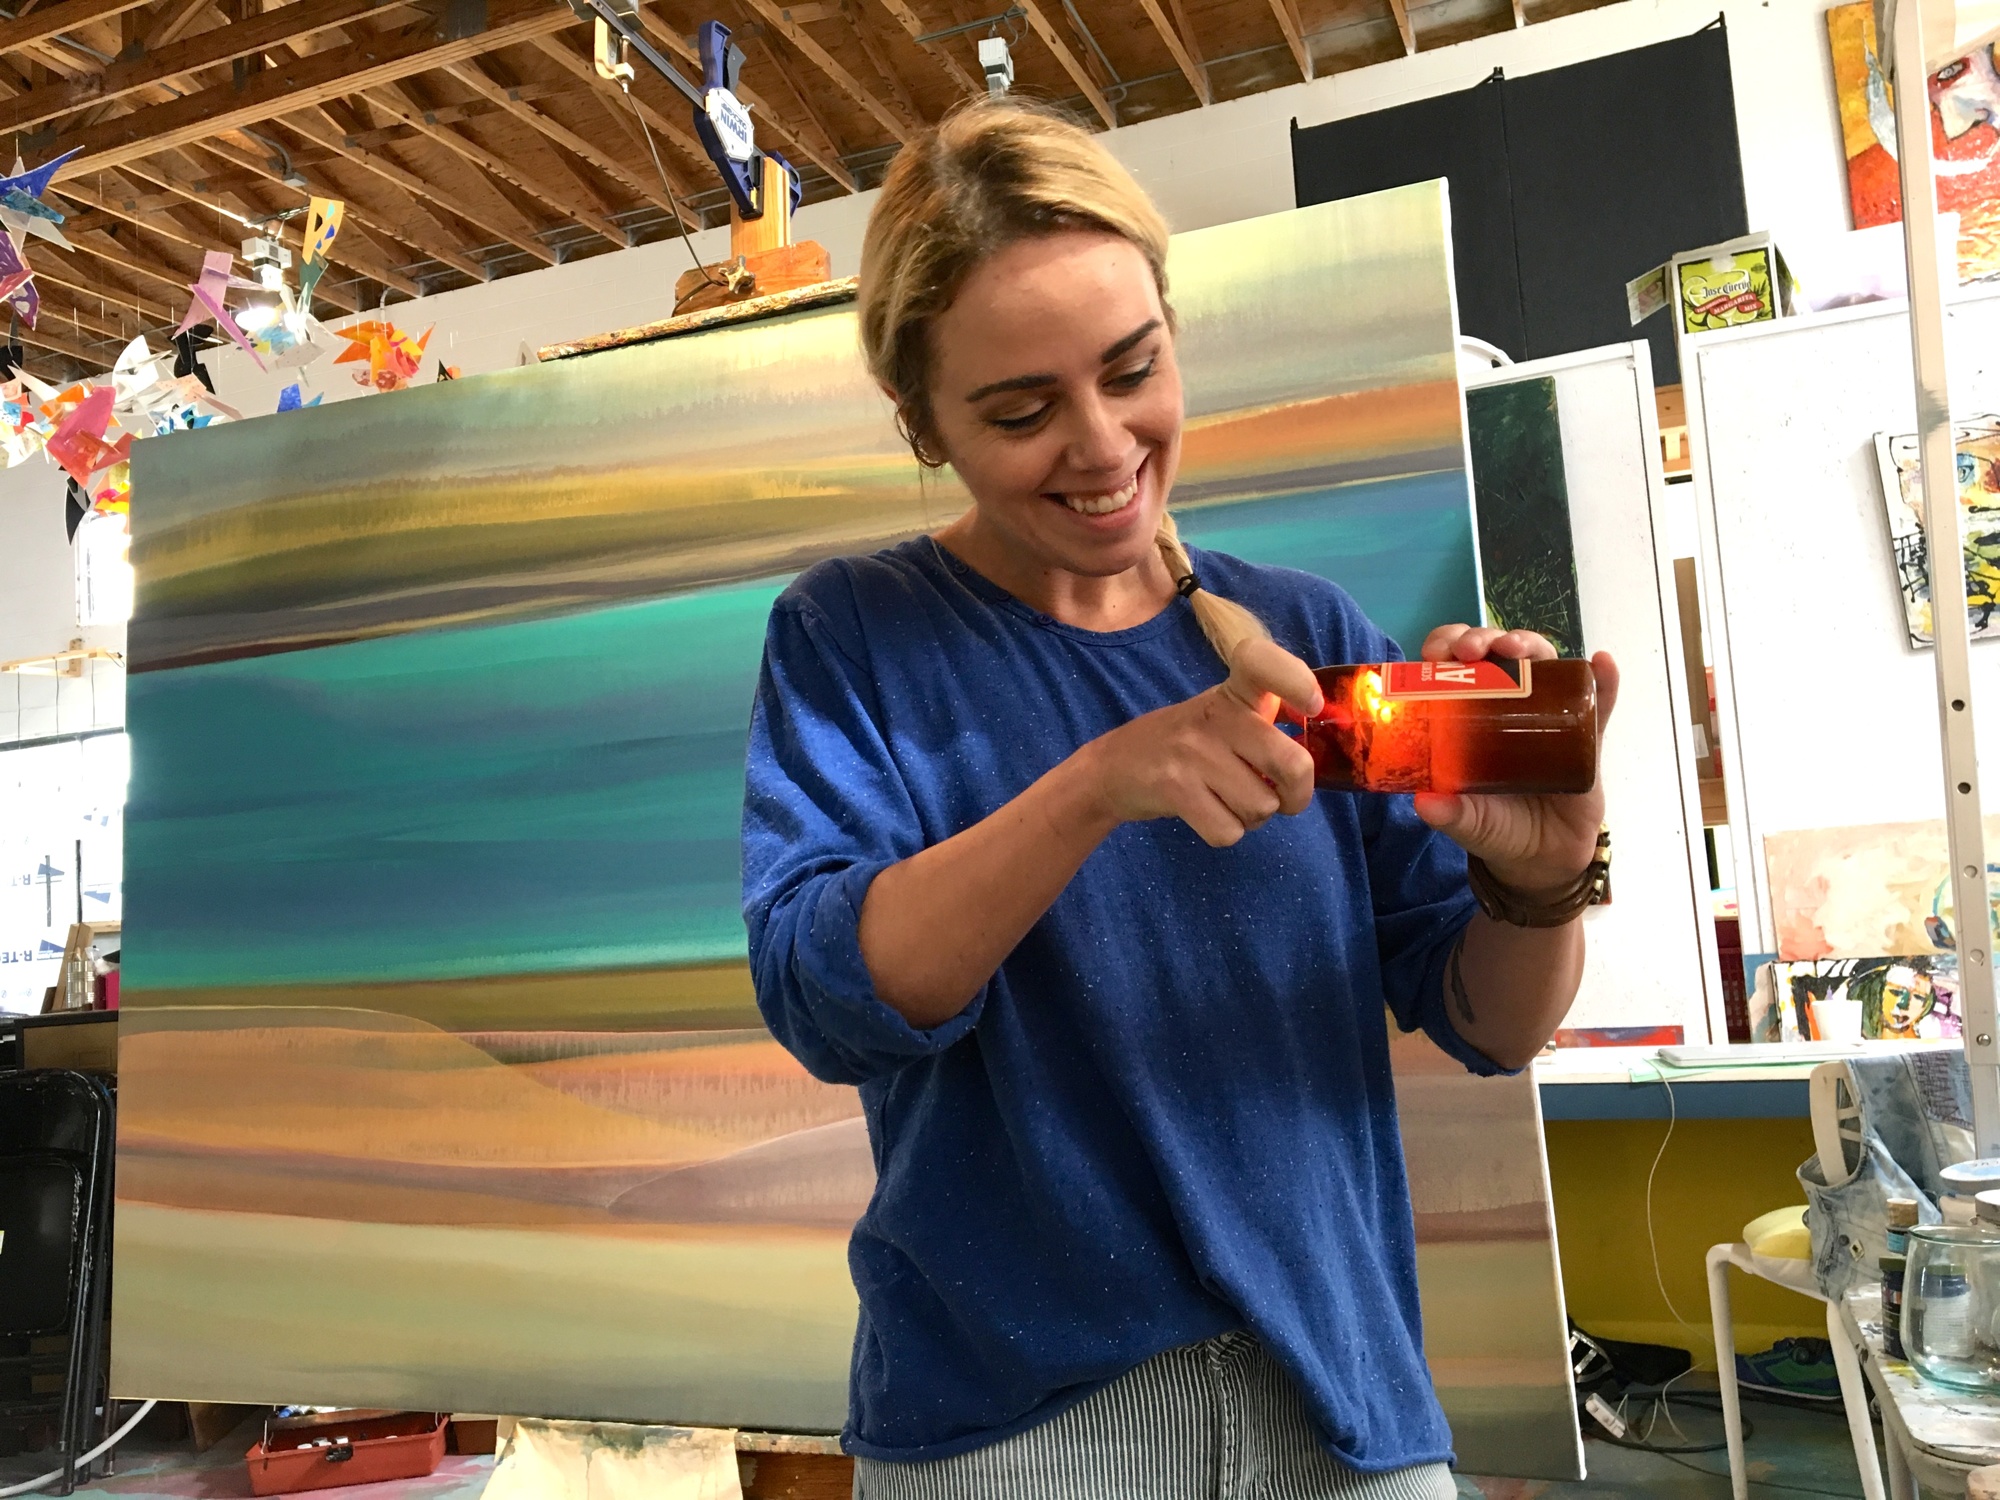 Petra Iston lights a candle as she works on a new painting, exploring a new style.